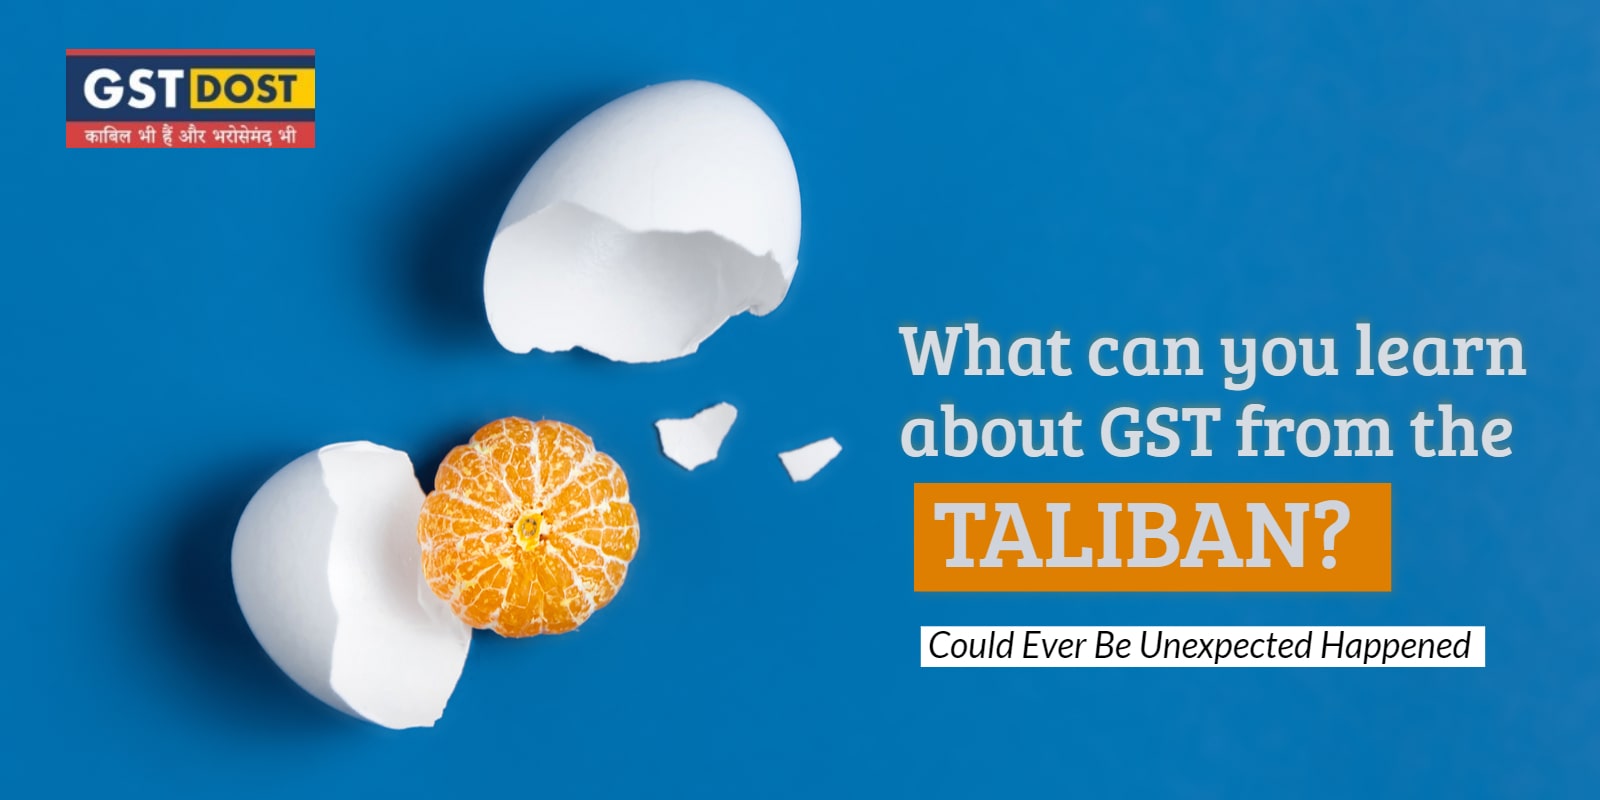 What can you learn about GST from the TALIBAN?